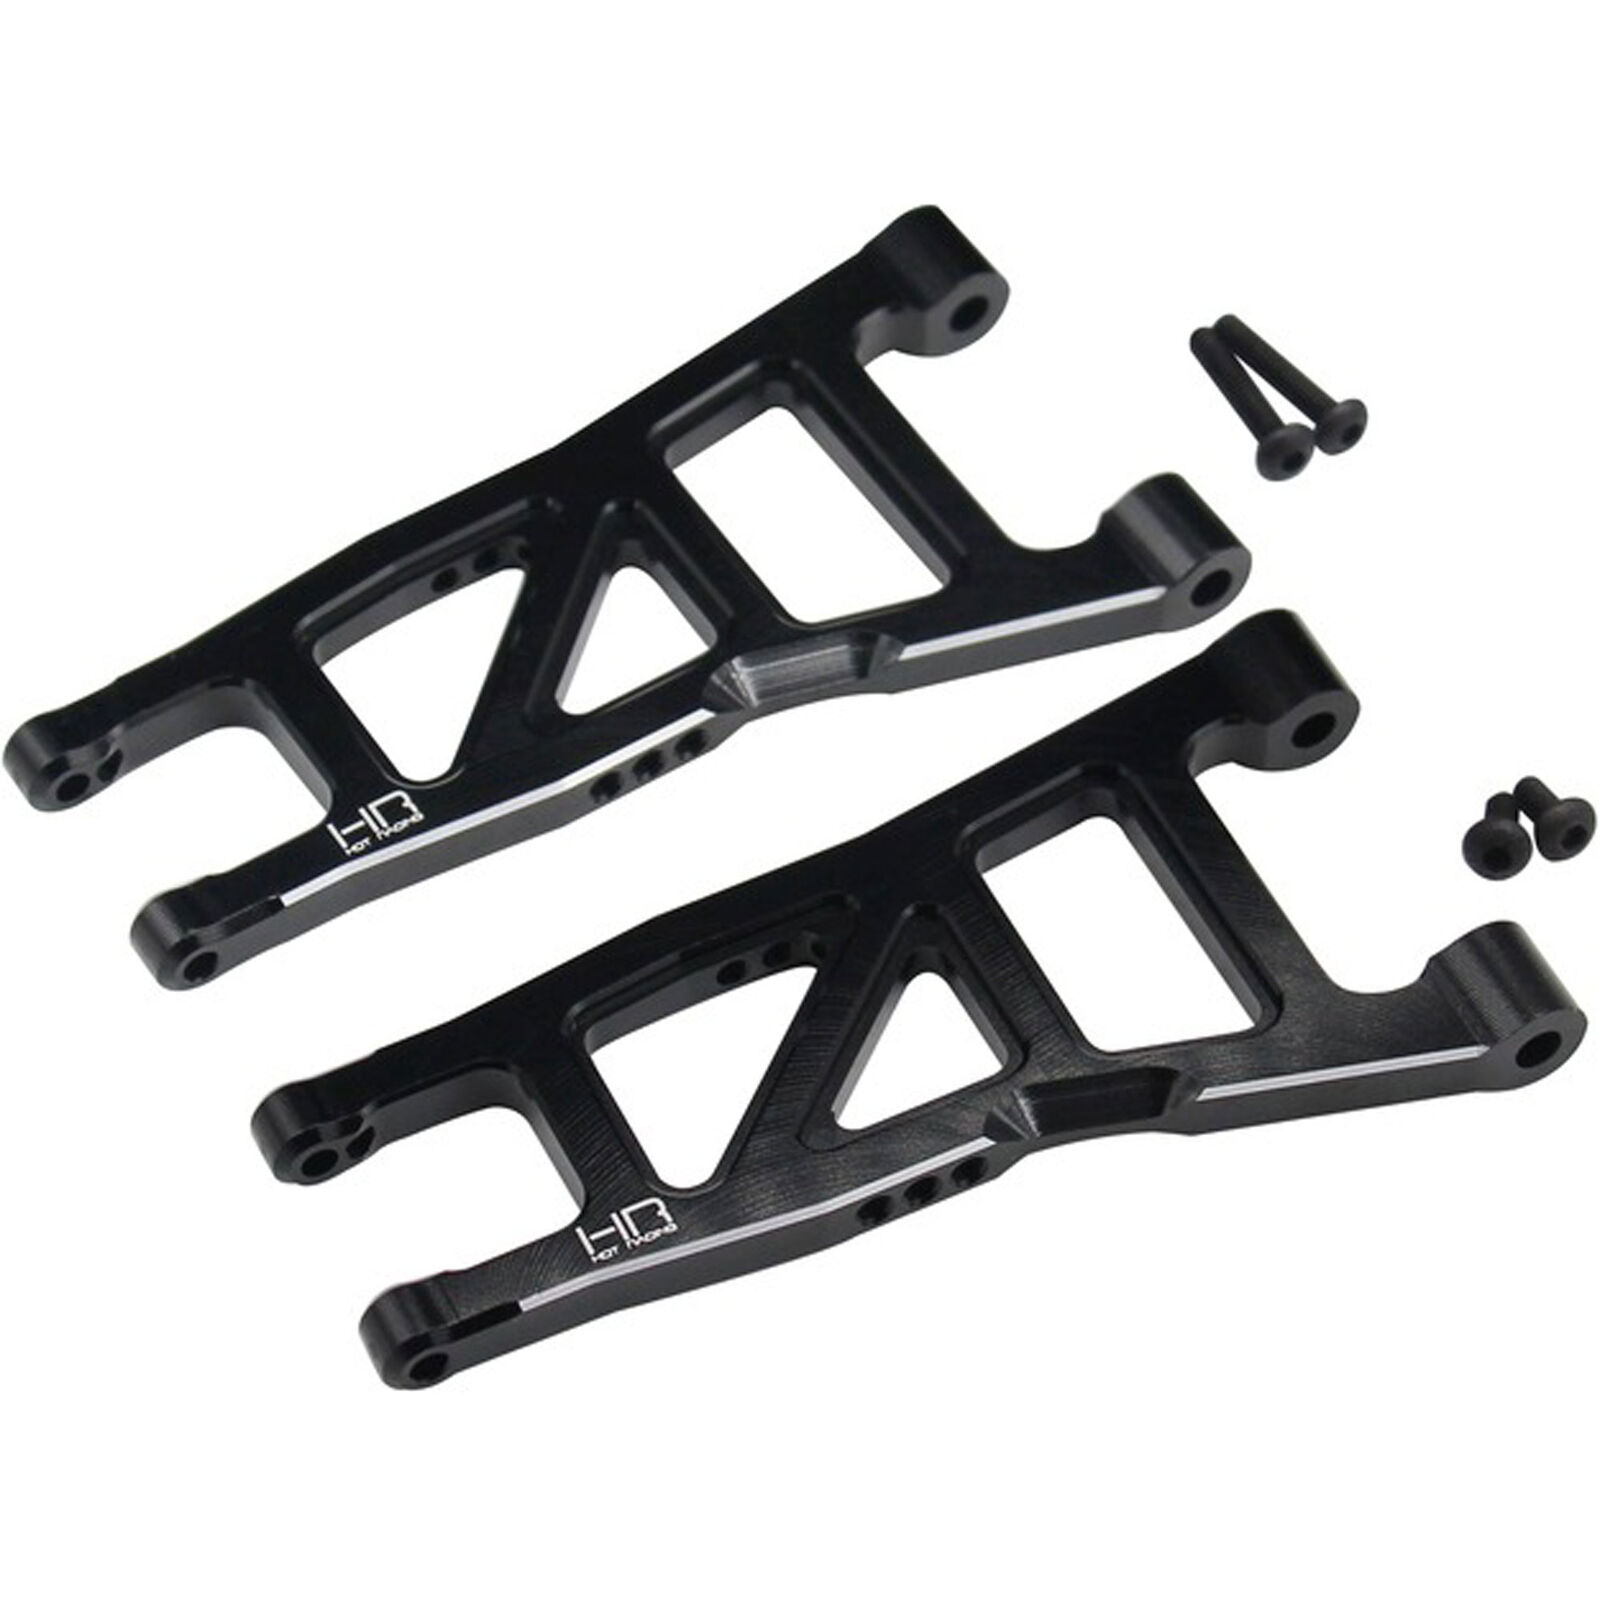 Lower Front Suspension Arms: ARRMA 1/10 4x4